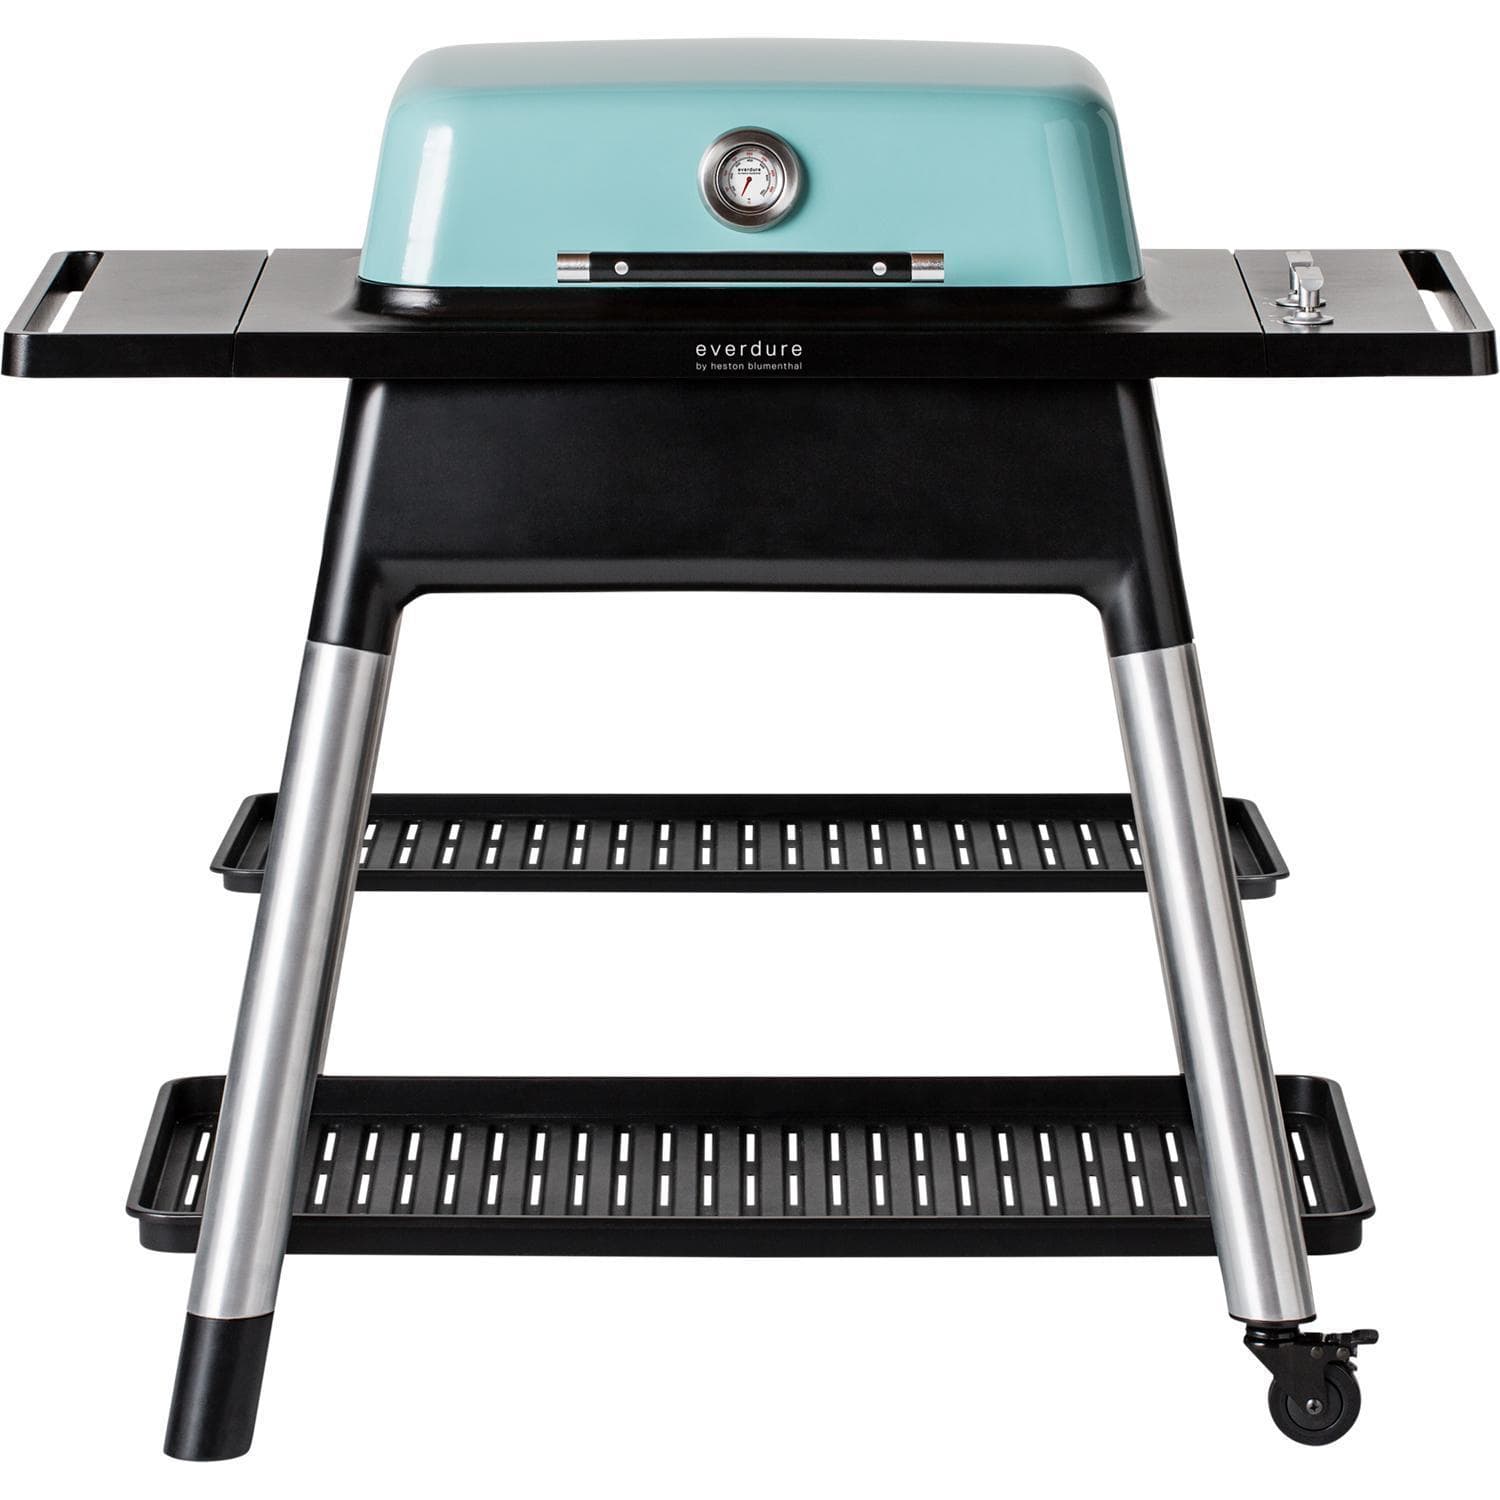 Everdure Propane Gas Grill Mint Everdure By Heston Blumenthal FORCE 48-Inch 2-Burner Propane Gas Grill With Stand